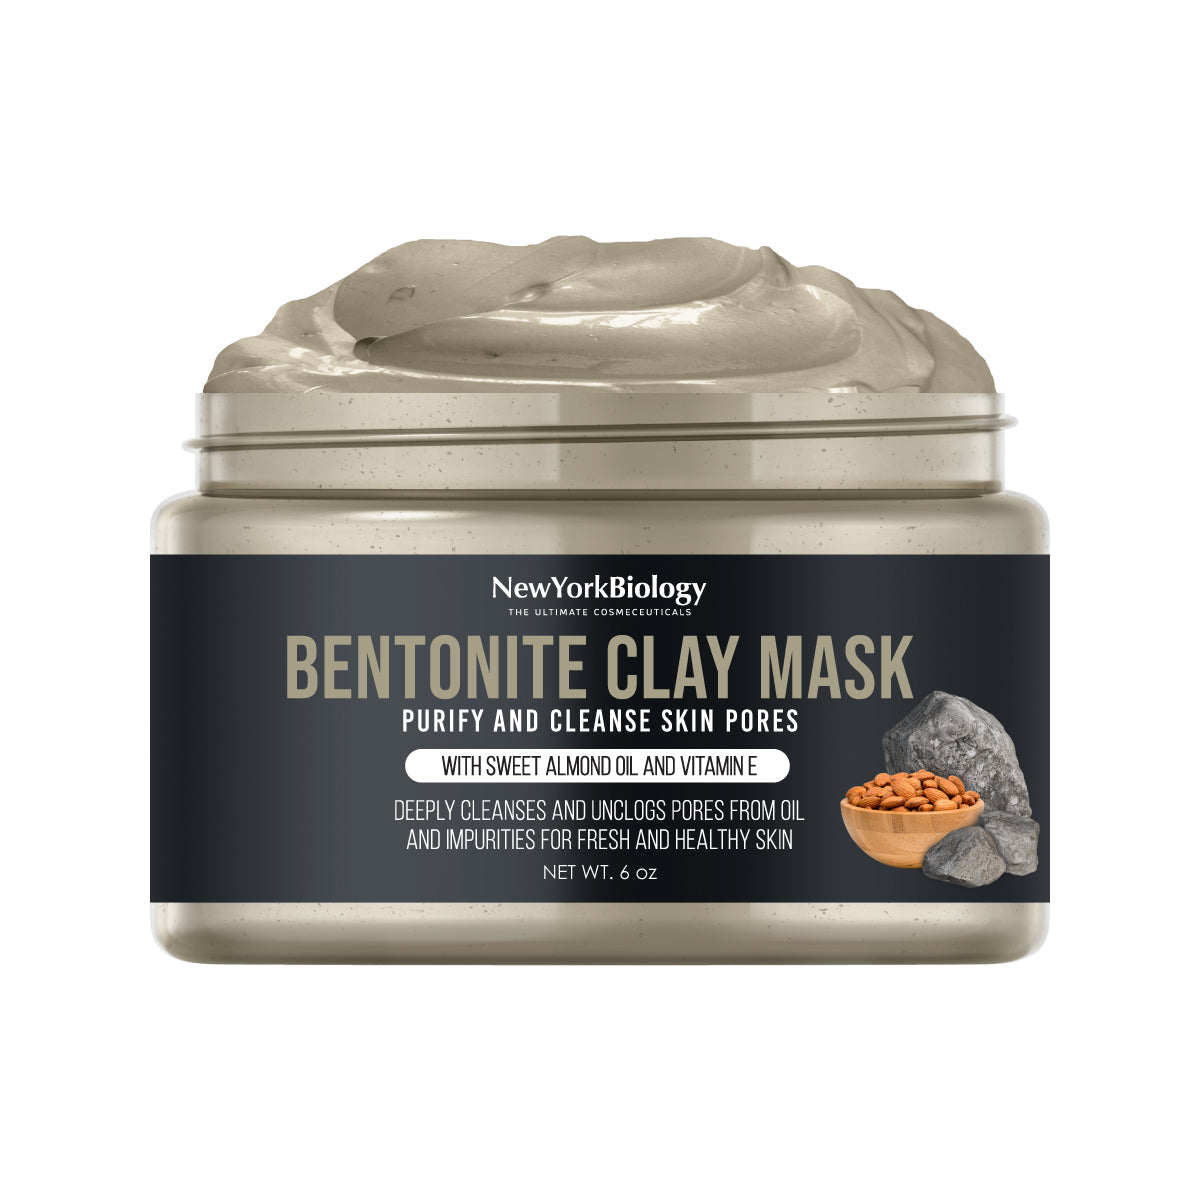  New York Biology Bentonite Clay Powder 1.25 lb – Deep Pore  Cleanser Indian Healing Clay for Acne and Oily Skin – 100% Natural Calcium Bentonite  Clay for Face Masks, Hair